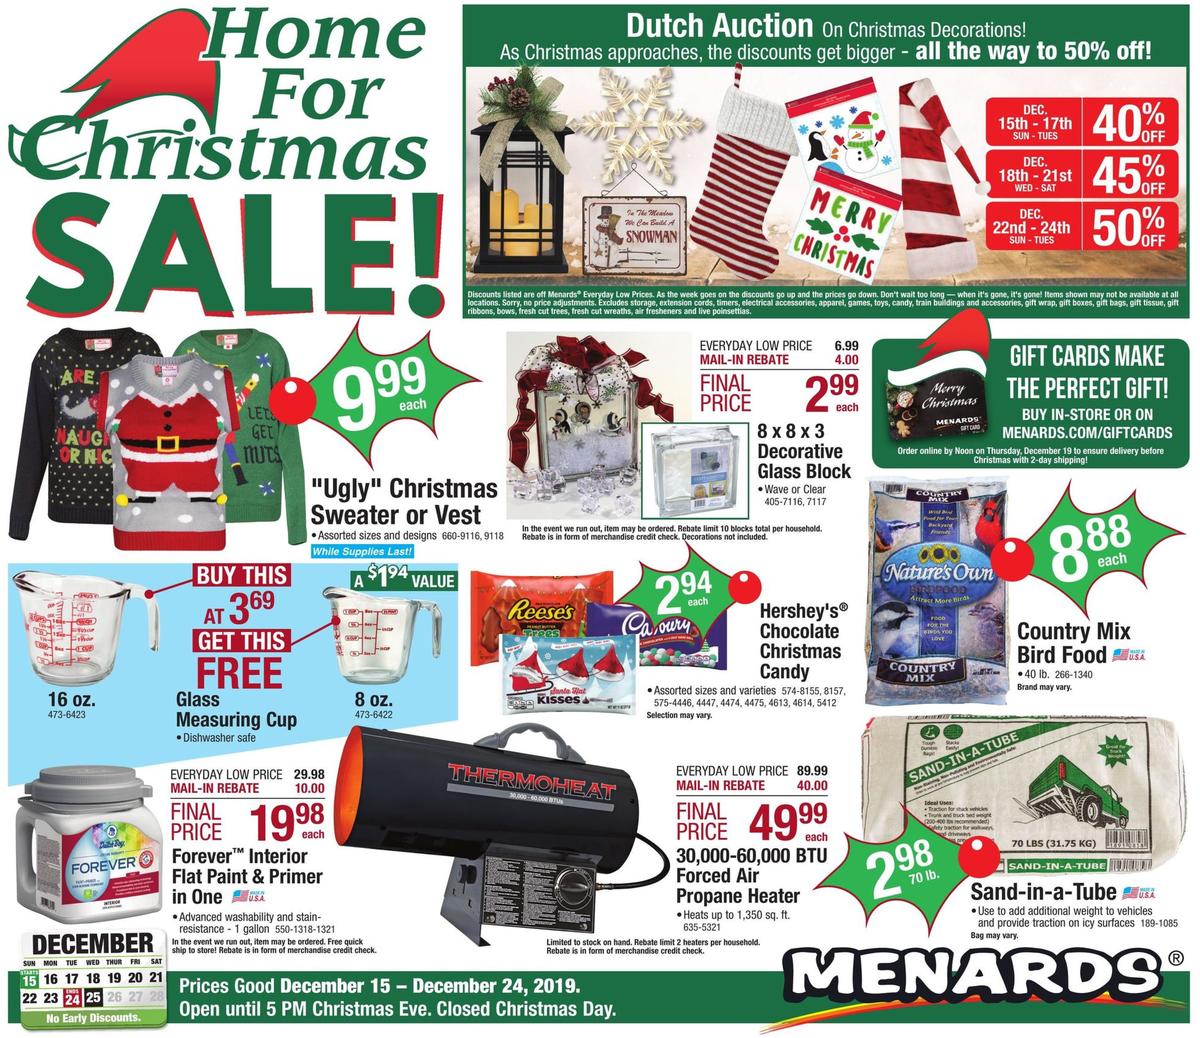 Menards Home For Christmas Sale Weekly Ads & Special Buys from December 15